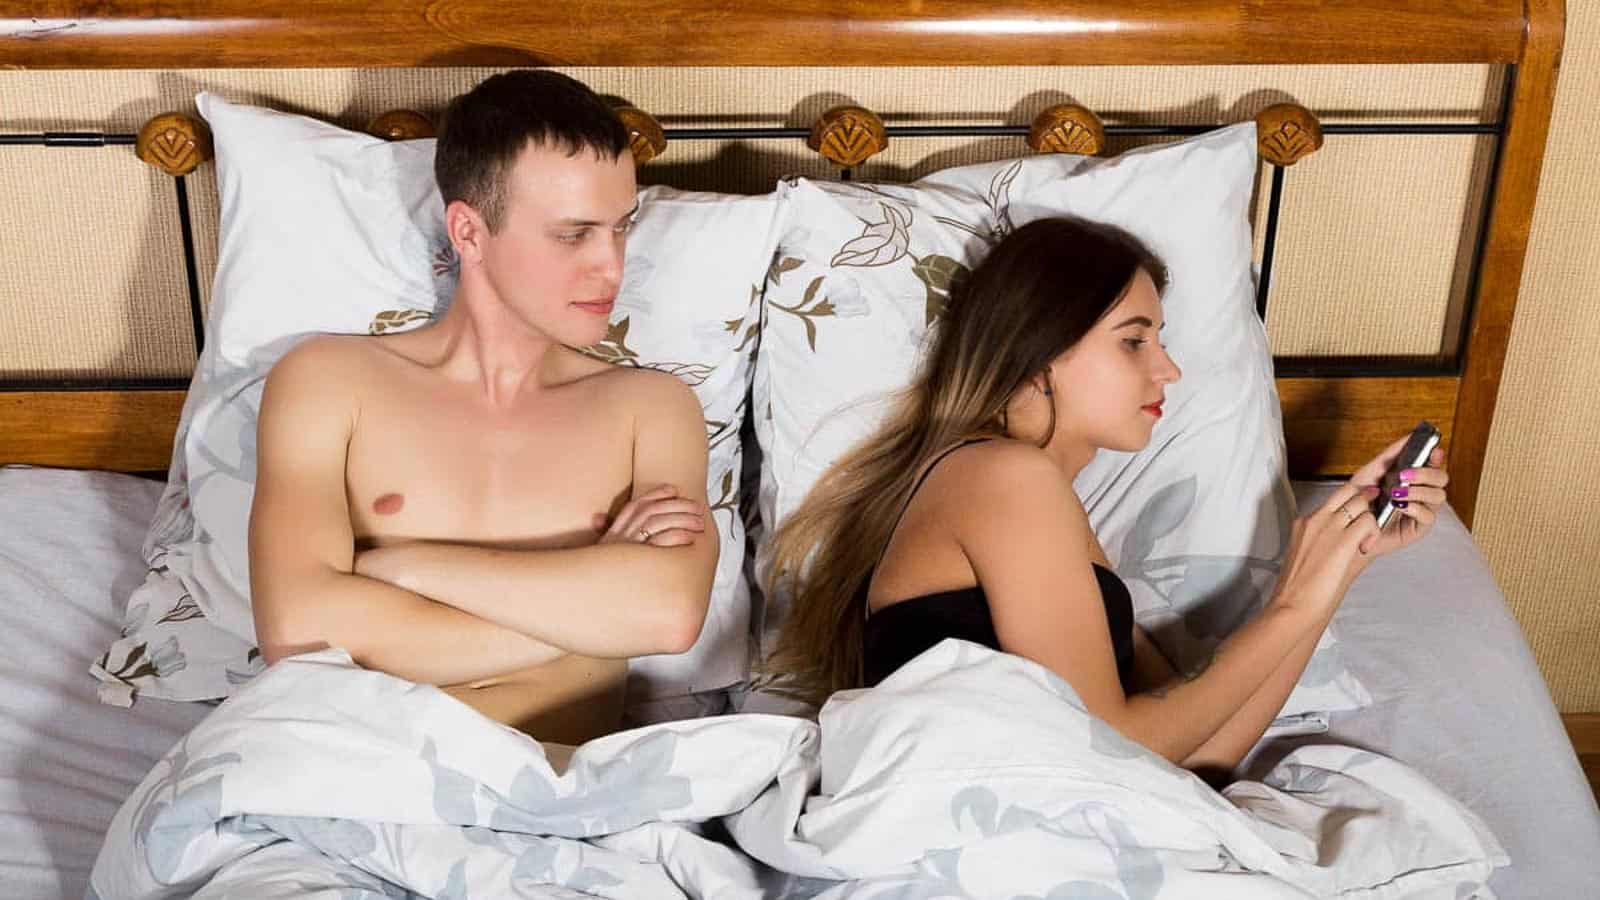 woman-texting-with-man-in-bed-alongside-1.